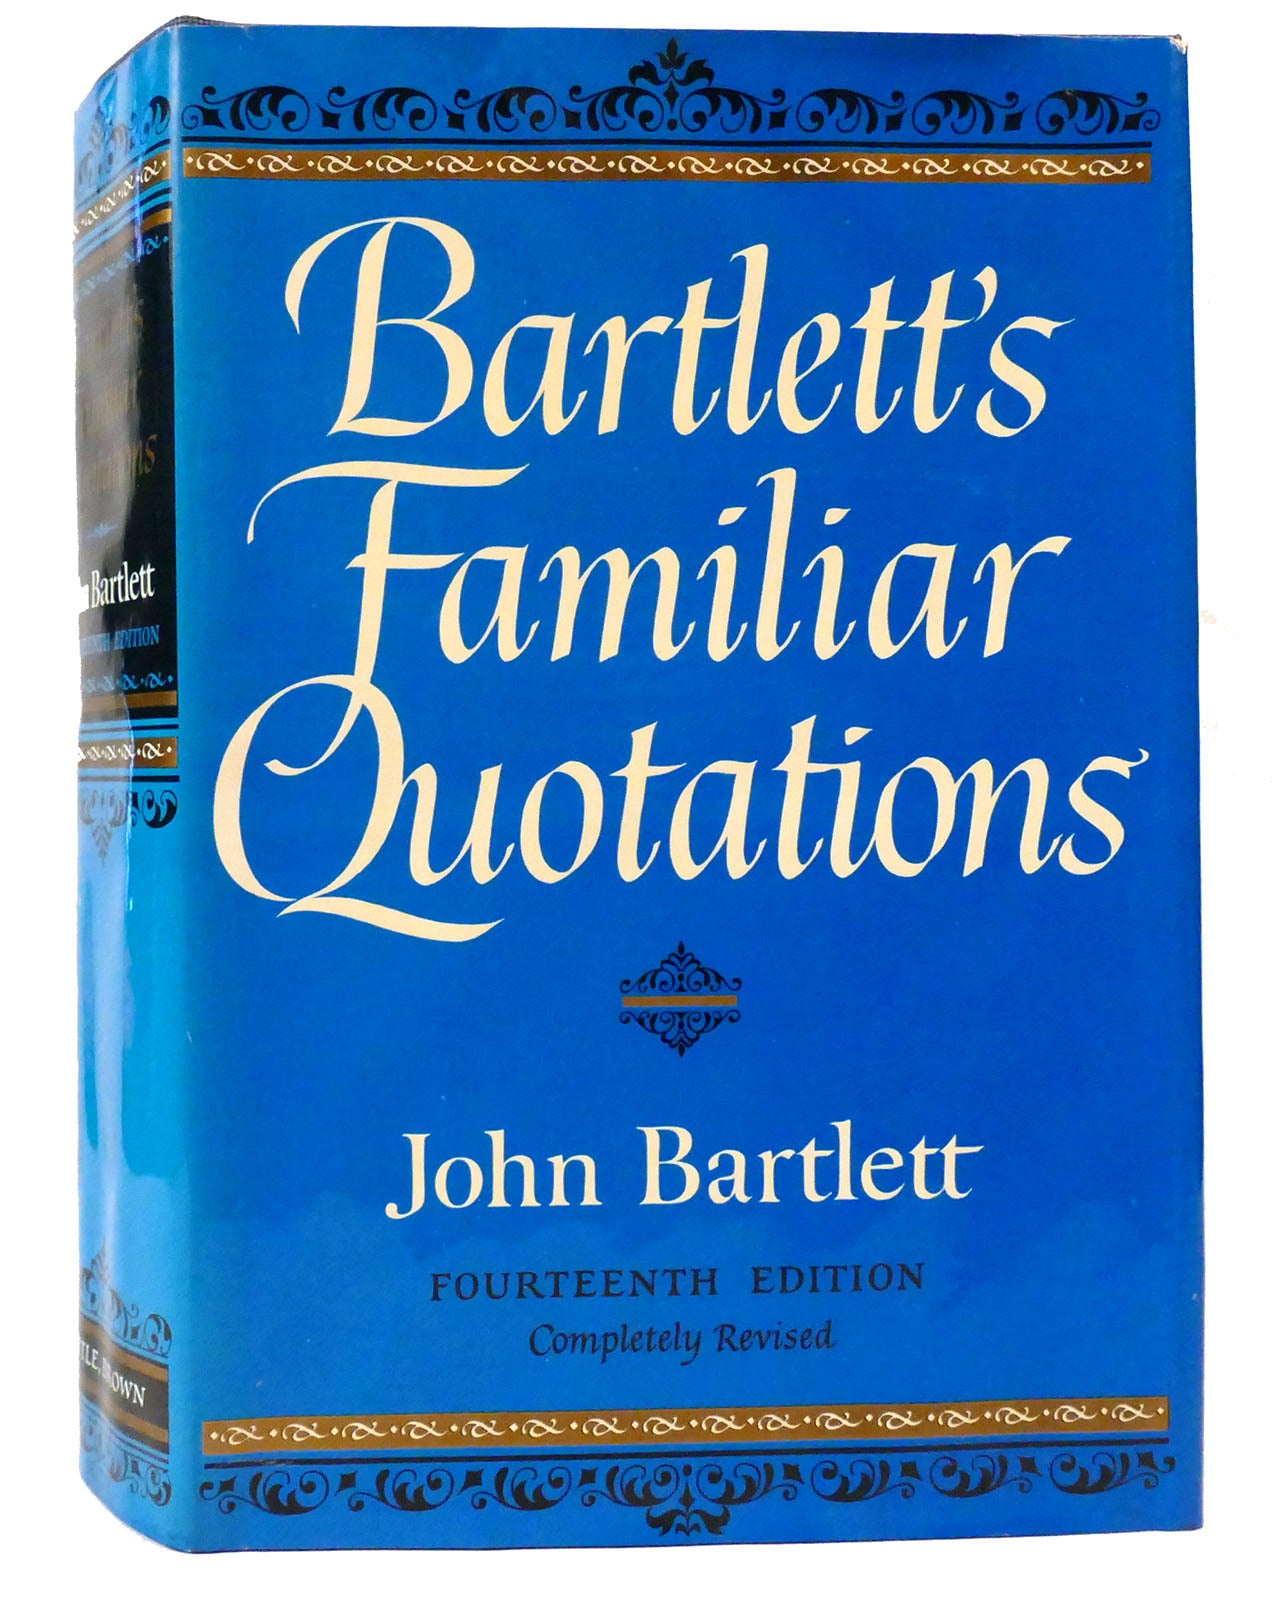 Bartletts Familiar Quotations John Bartlett 14th Revised Edition Second Printing 